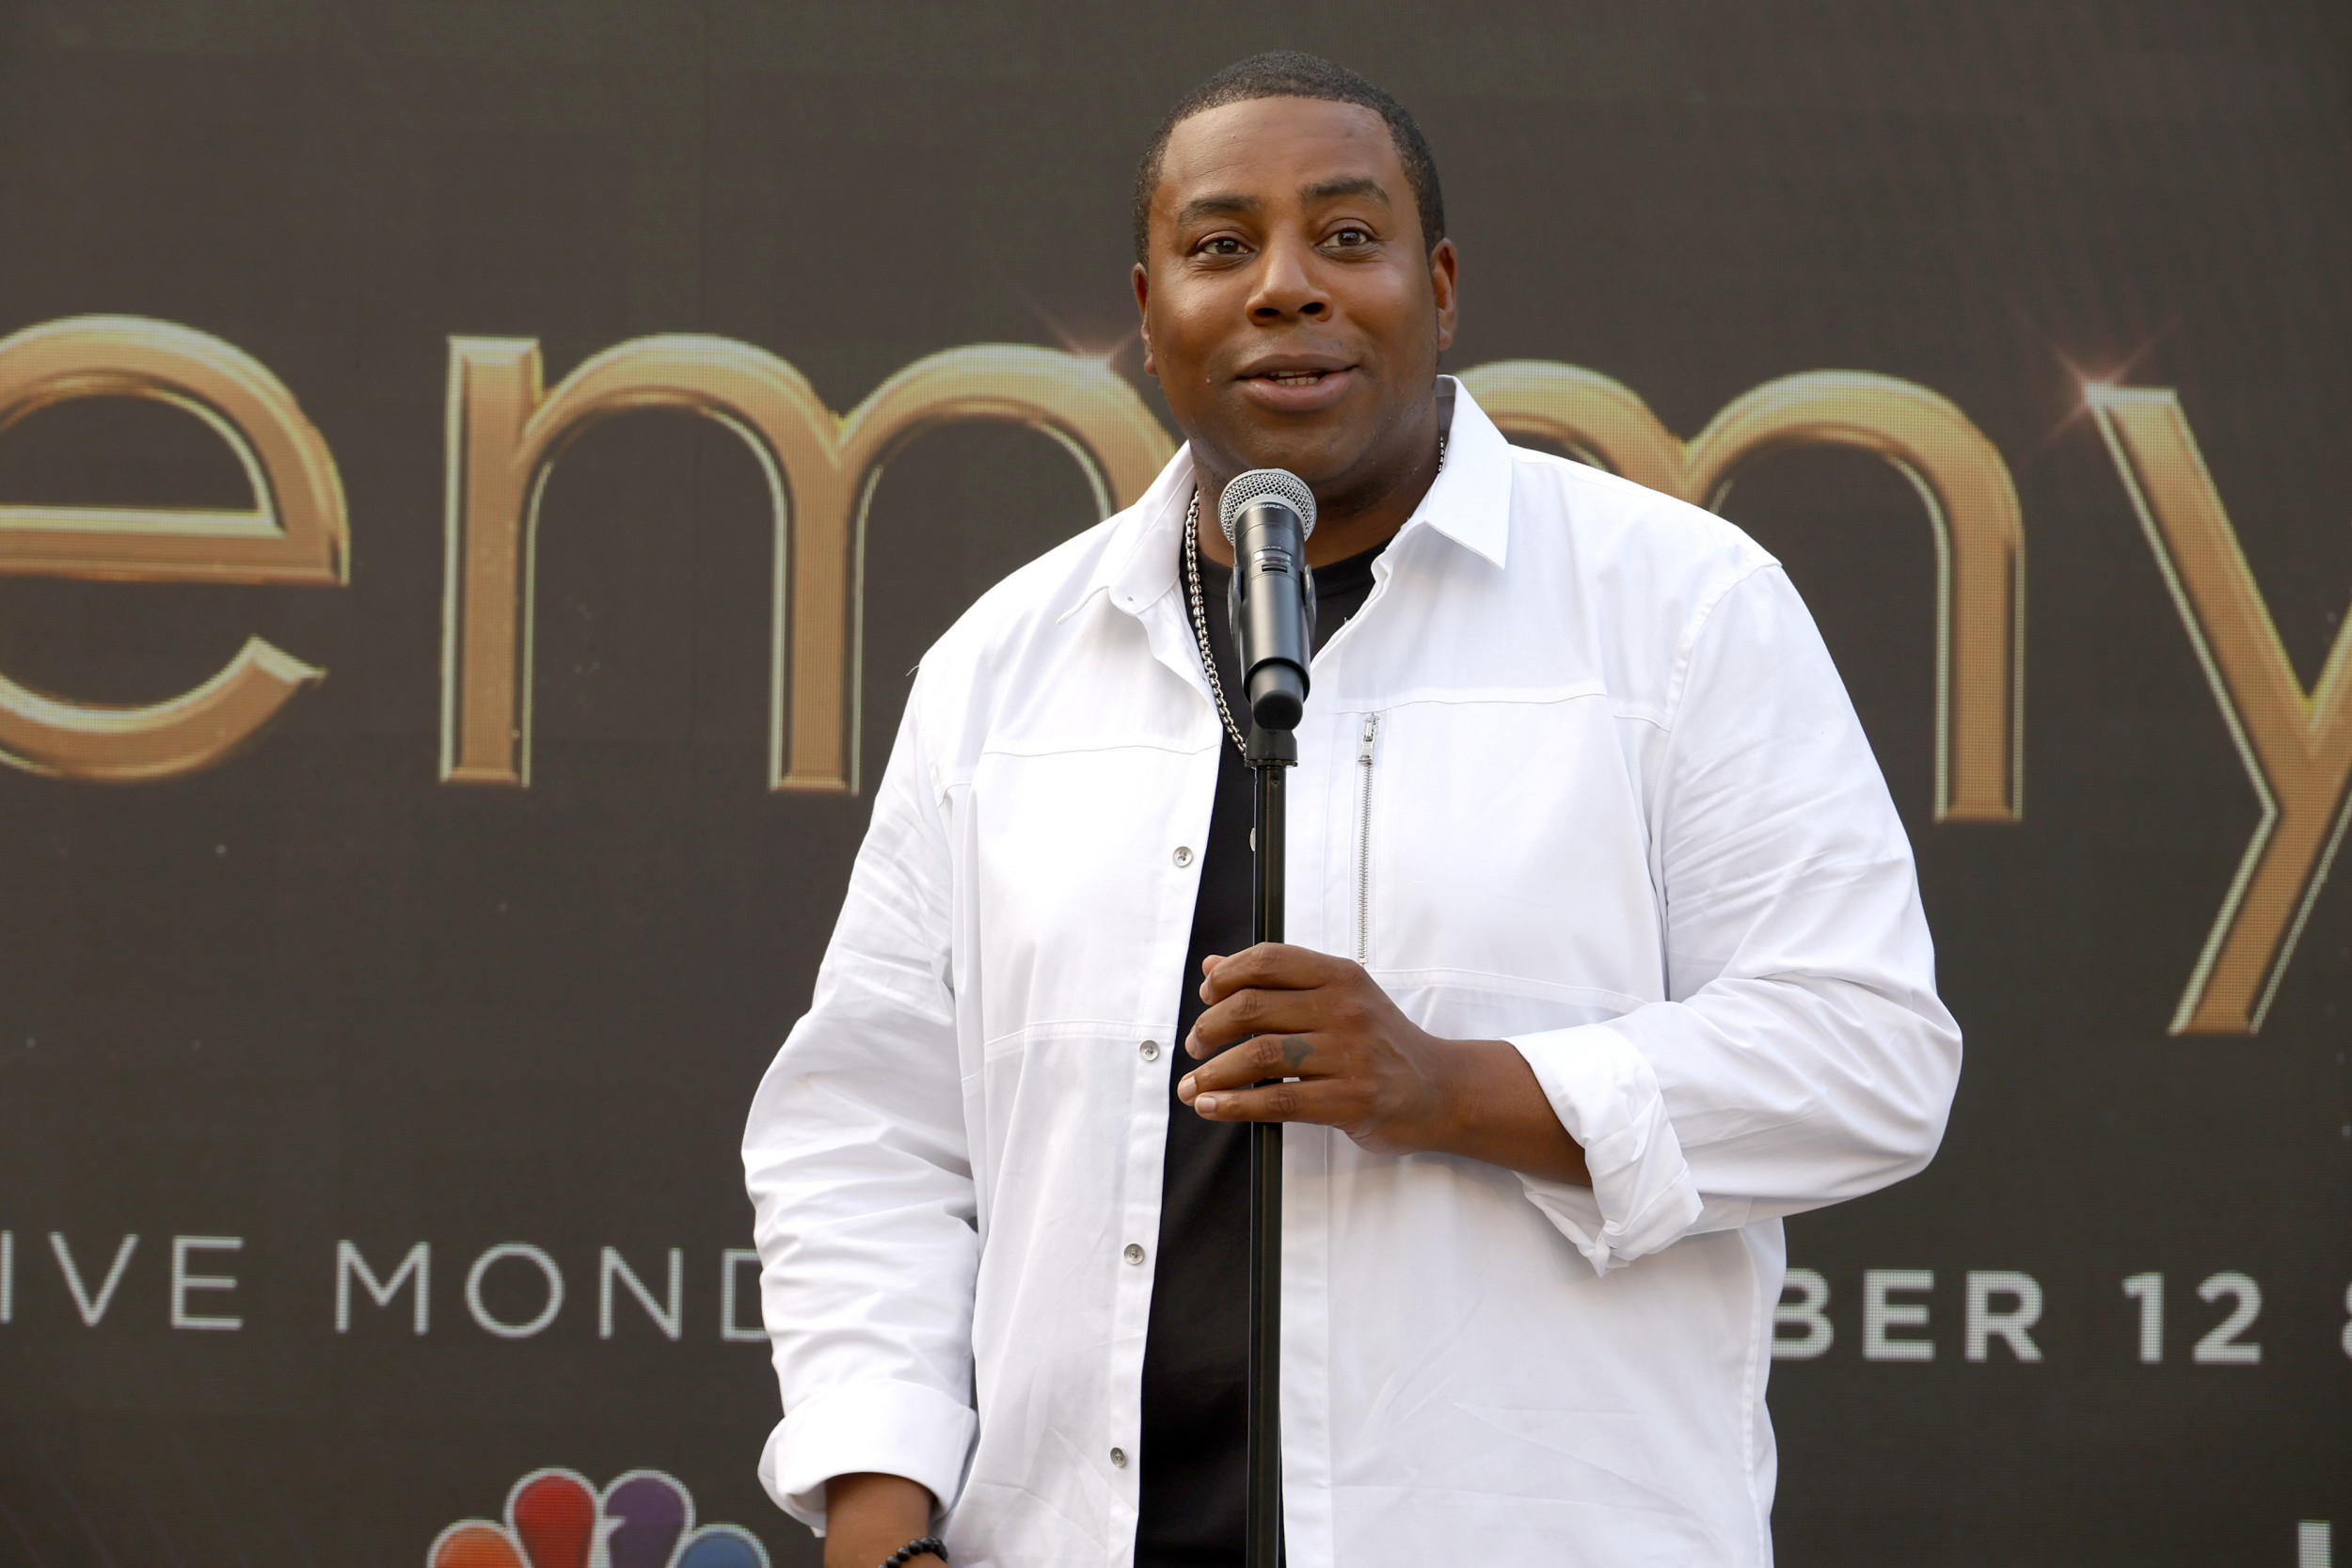 unknown facts about kenan thompson